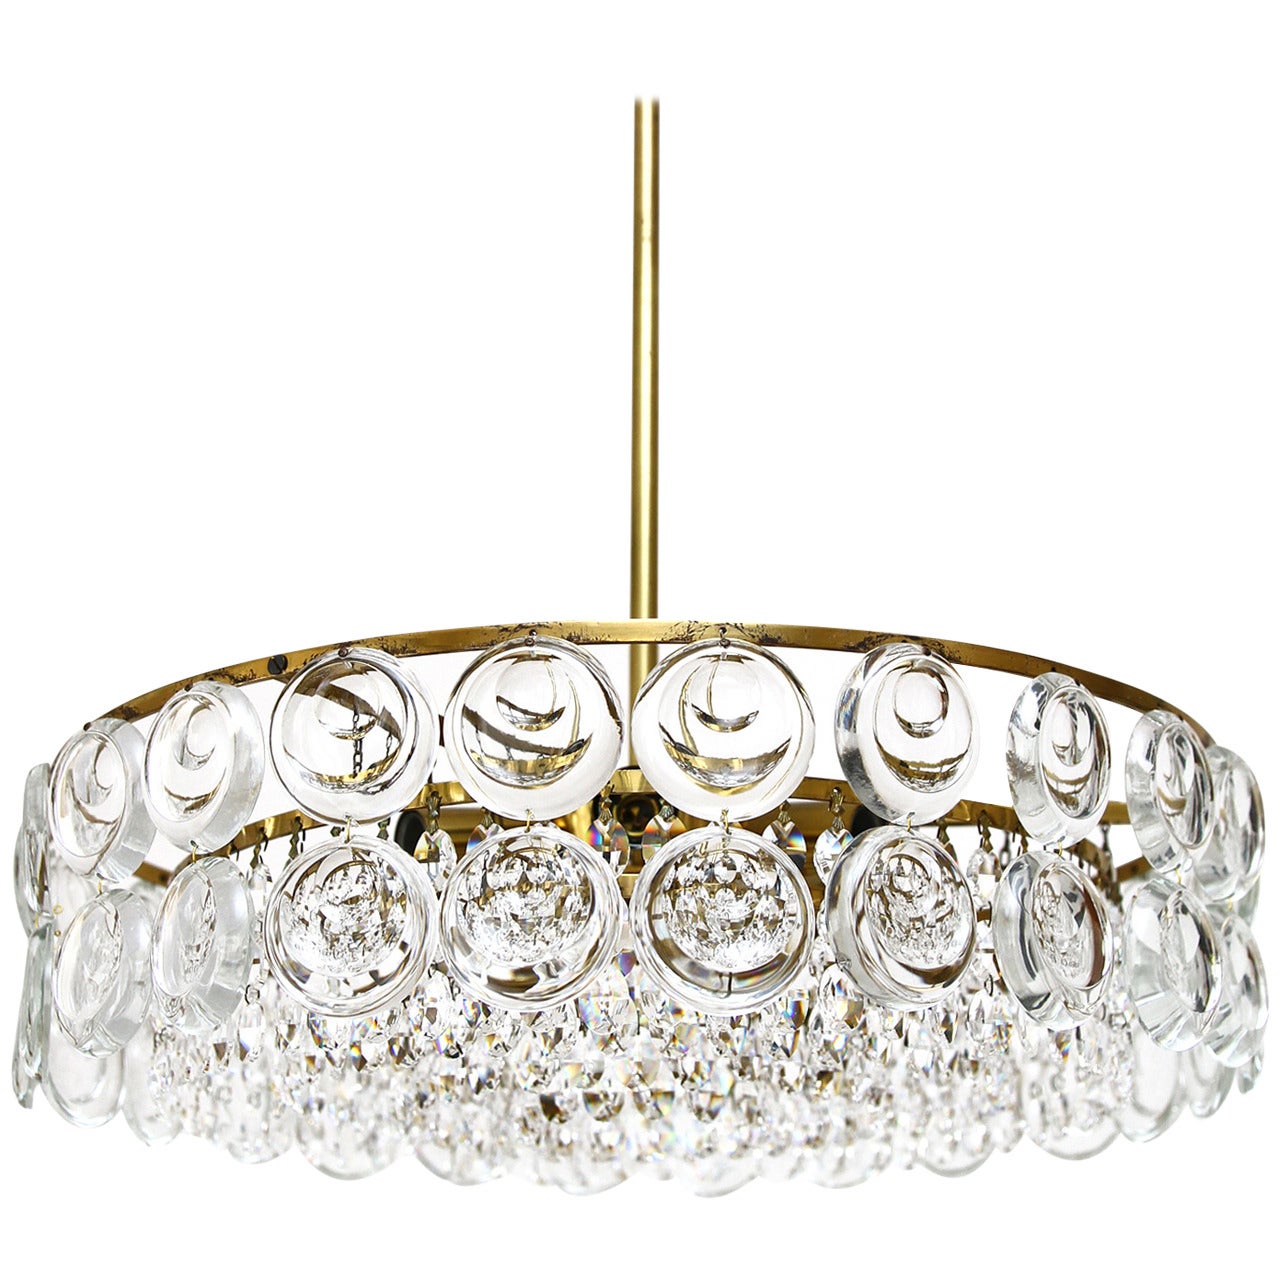 Brass and Lens Glass Sciolari Style Chandelier or Flush Mount, Italy, 1960s